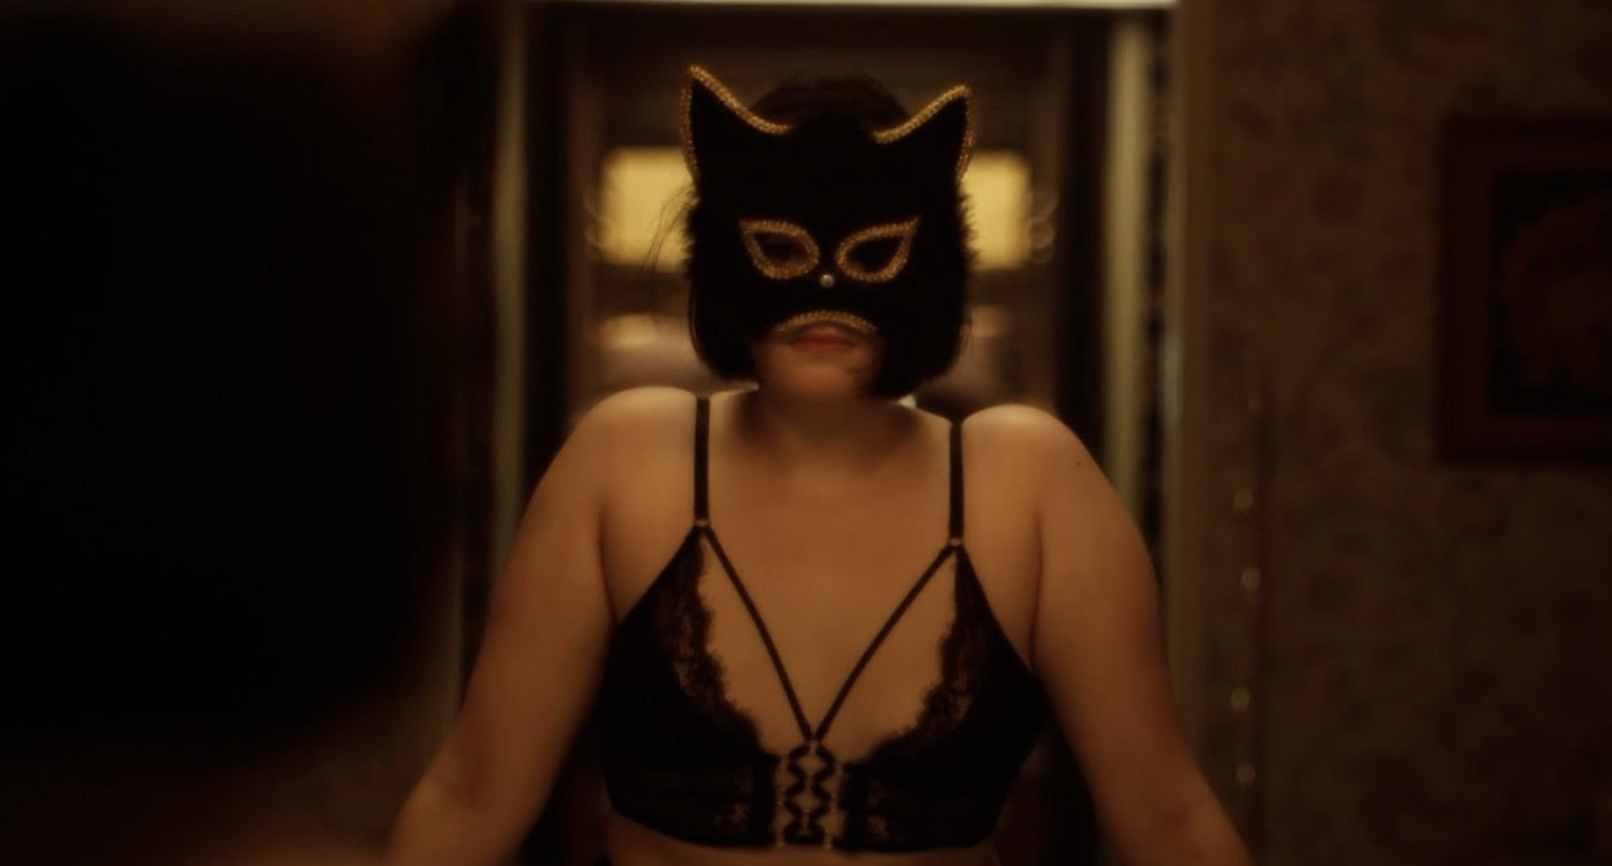 Kat wearing lingerie and a cat mask while preparing for her cam show in &quot;Euphoria&quot;